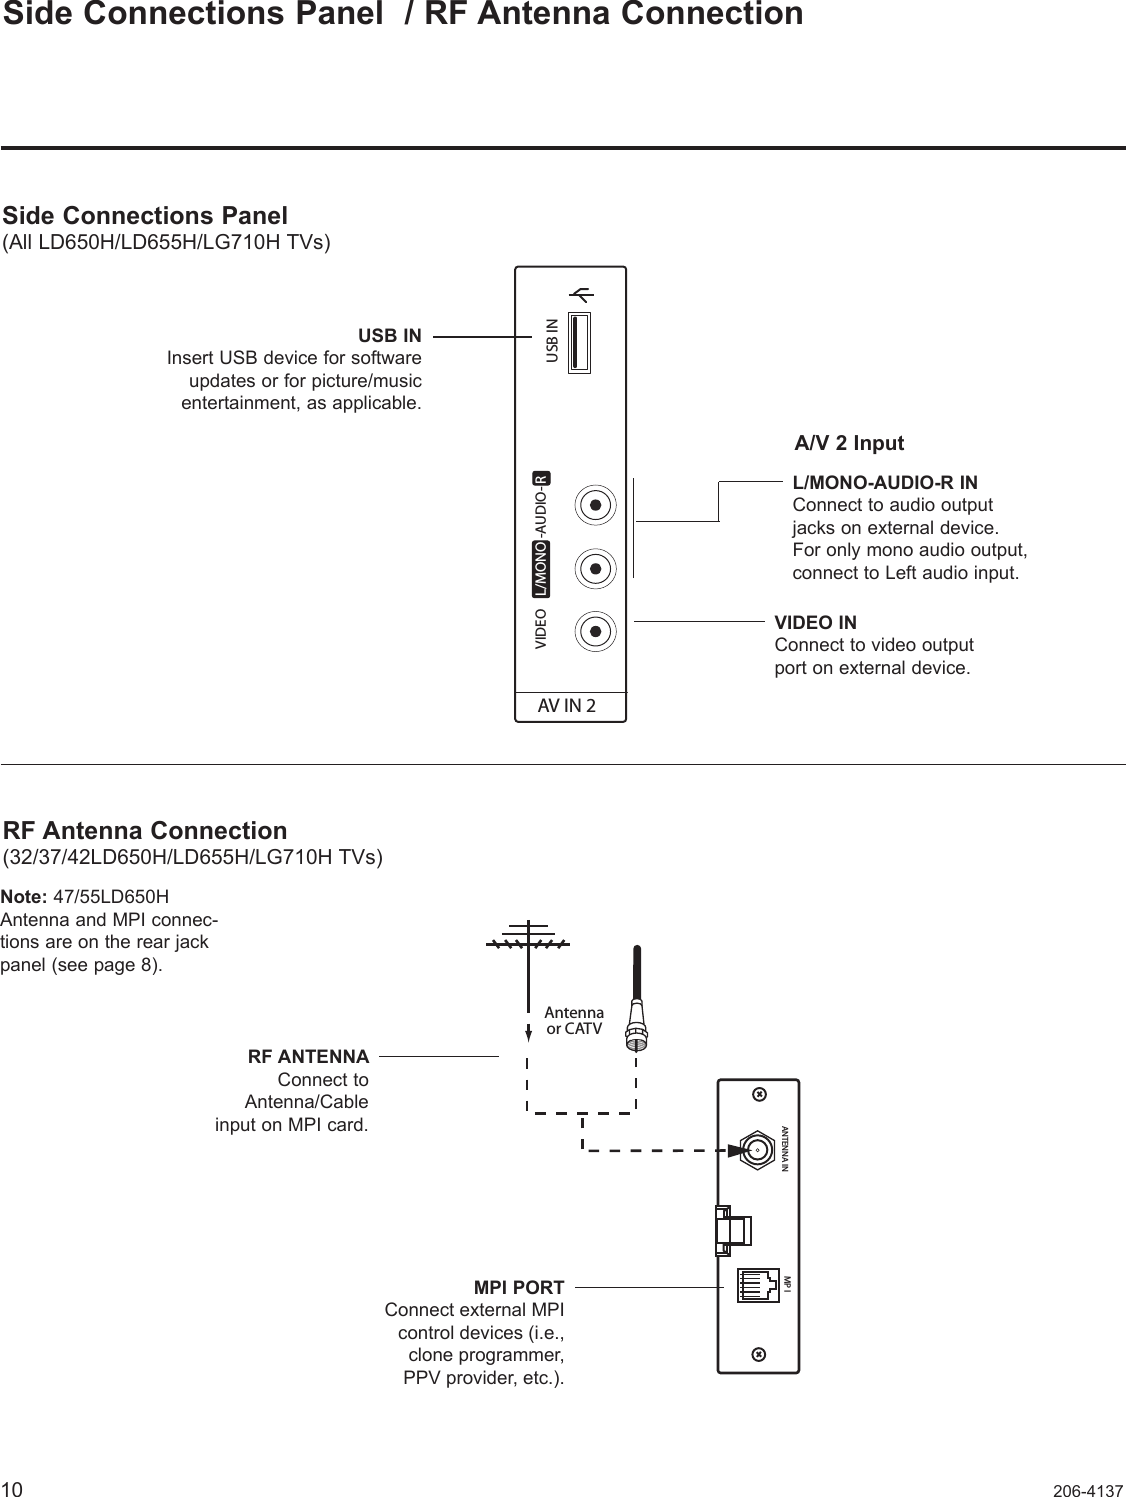 10 206-4137Side Connections Panel  / RF Antenna ConnectionAV IN 2  L/MONO -AUDIO- RVIDEO USB INUSB INInsert USB device for software updates or for picture/music entertainment, as applicable.Antennaor CATVANTENNA IN MP IRF Antenna Connection(32/37/42LD650H/LD655H/LG710H TVs)Side Connections Panel(All LD650H/LD655H/LG710H TVs)VIDEO INConnect to video output port on external device.L/MONO-AUDIO-R INConnect to audio output jacks on external device.For only mono audio output,  connect to Left audio input.A/V 2 InputRF ANTENNA Connect to Antenna/Cable input on MPI card.MPI PORTConnect external MPI control devices (i.e., clone programmer, PPV provider, etc.).Note: 47/55LD650H Antenna and MPI connec-tions are on the rear jack panel (see page 8).